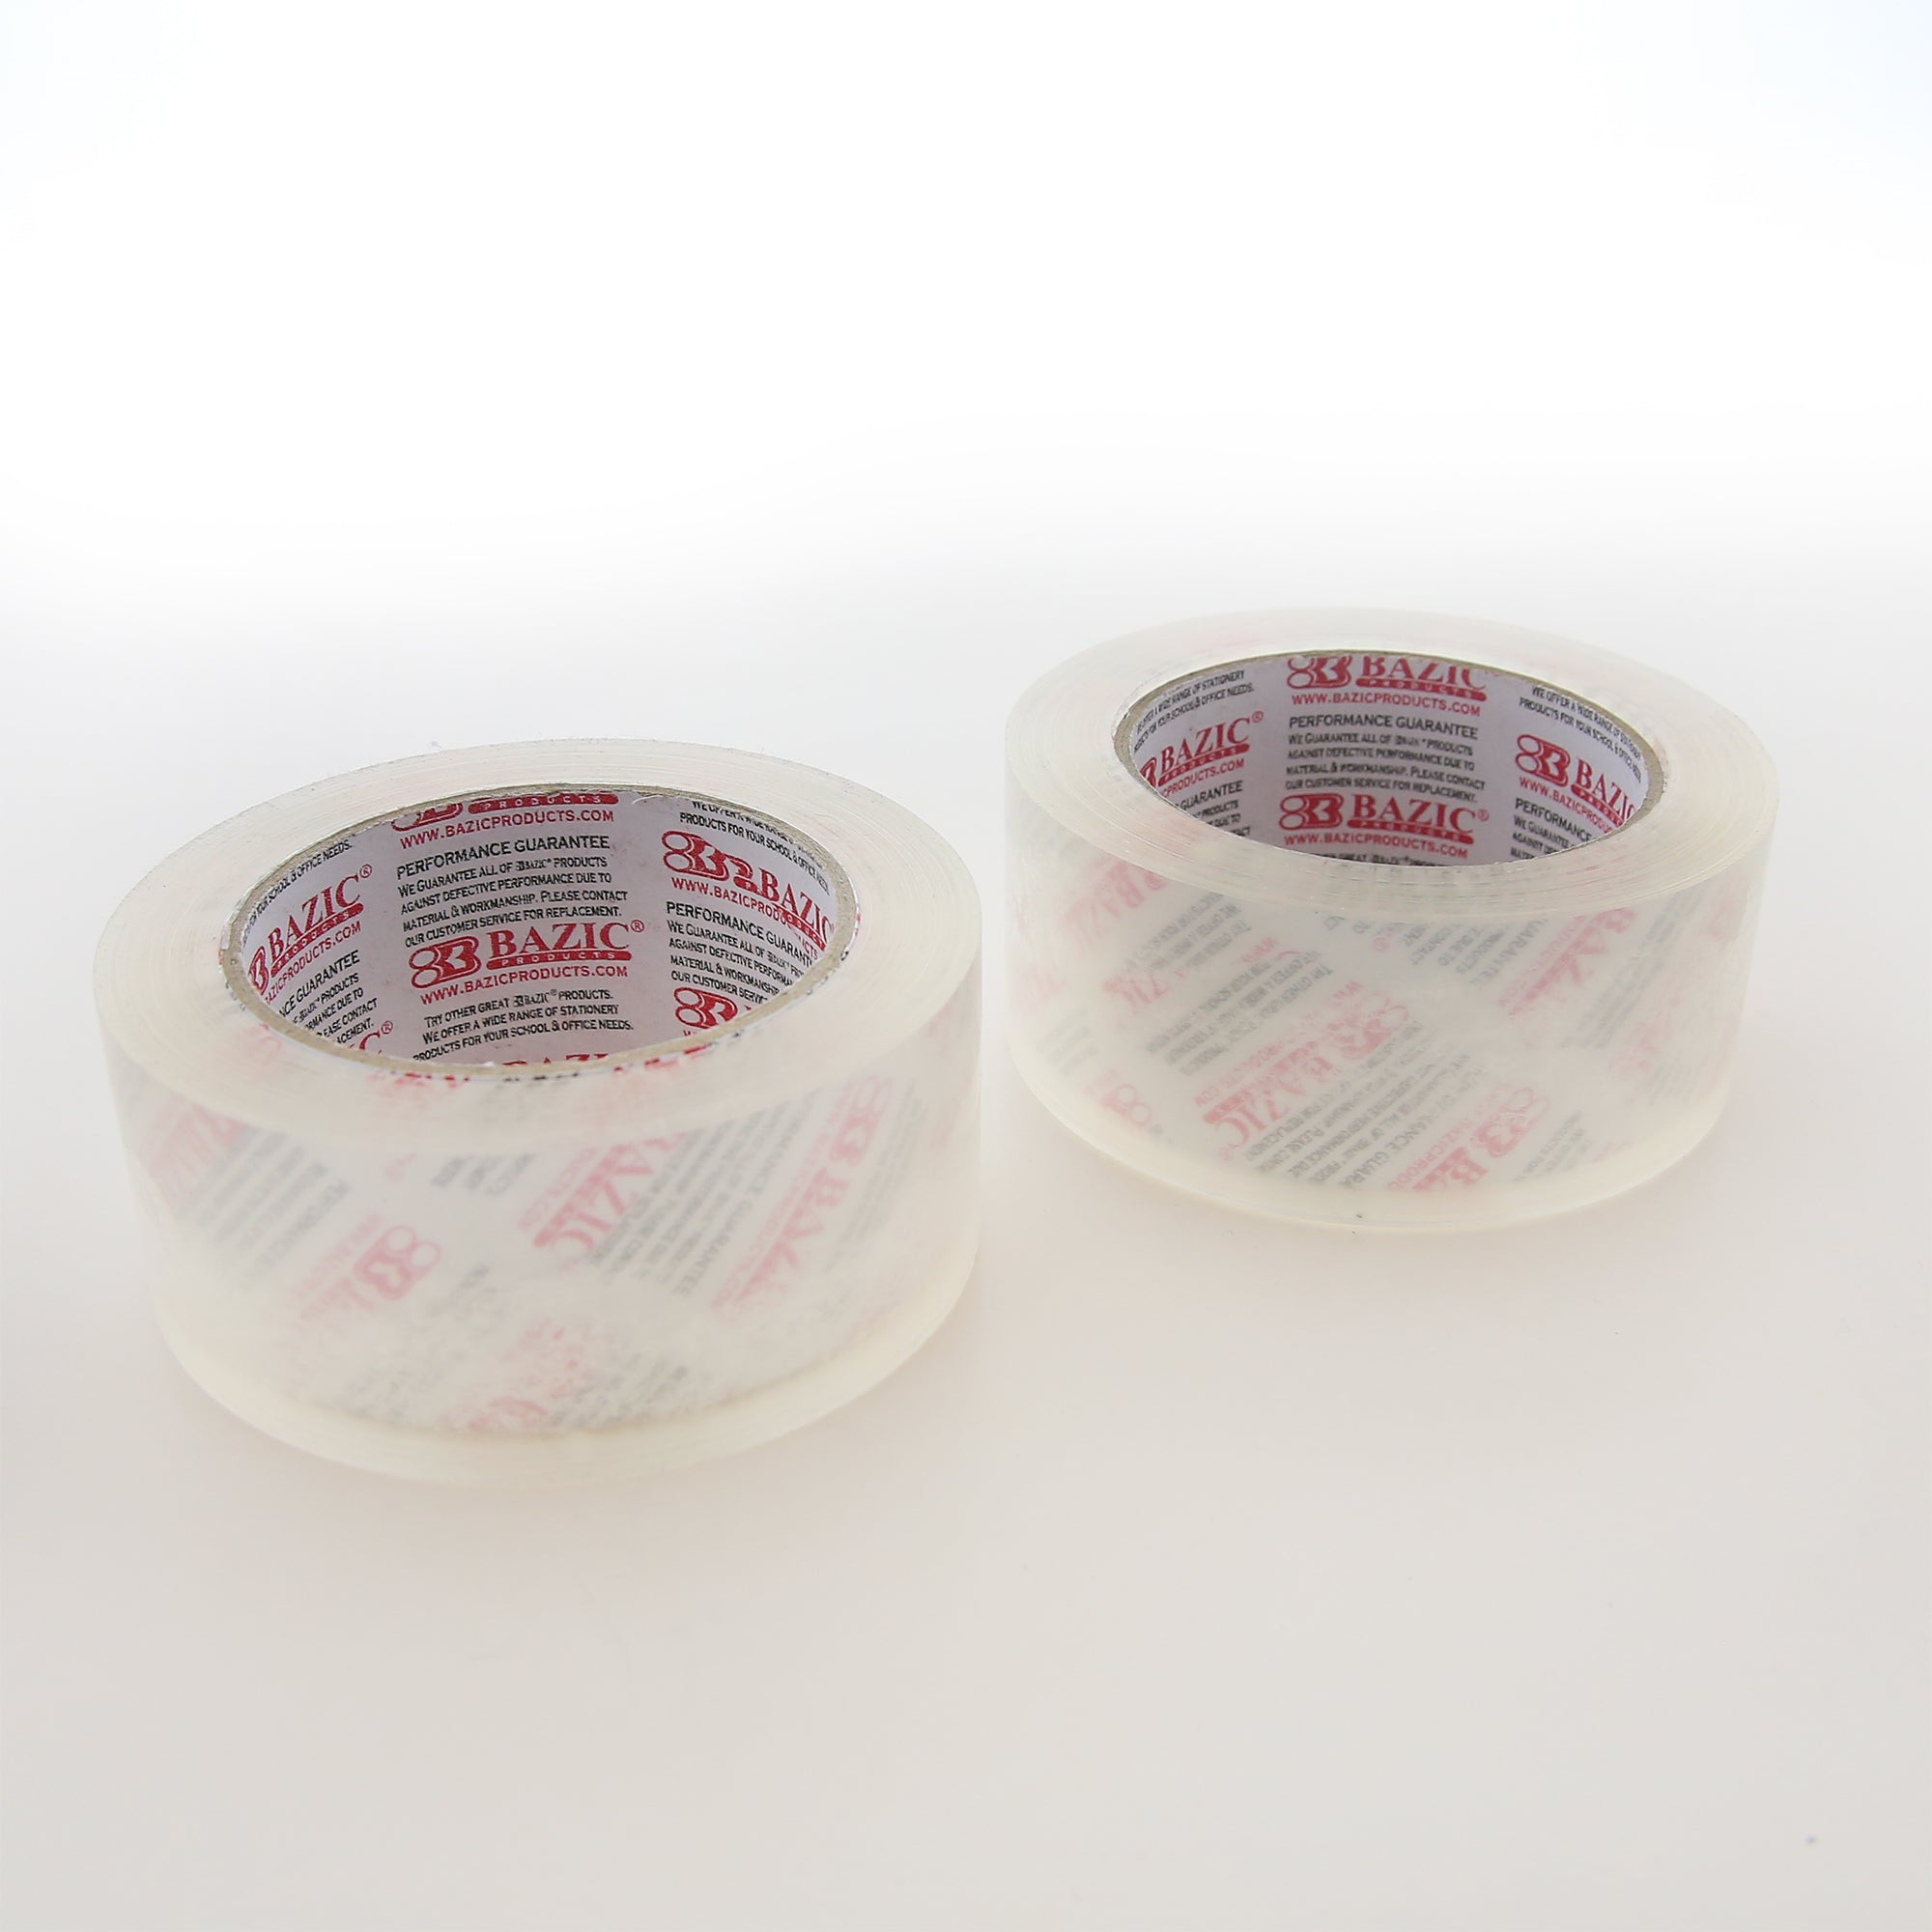 BAZIC 1.88 X 54.6 Yards Color Packing Tape Bazic Products